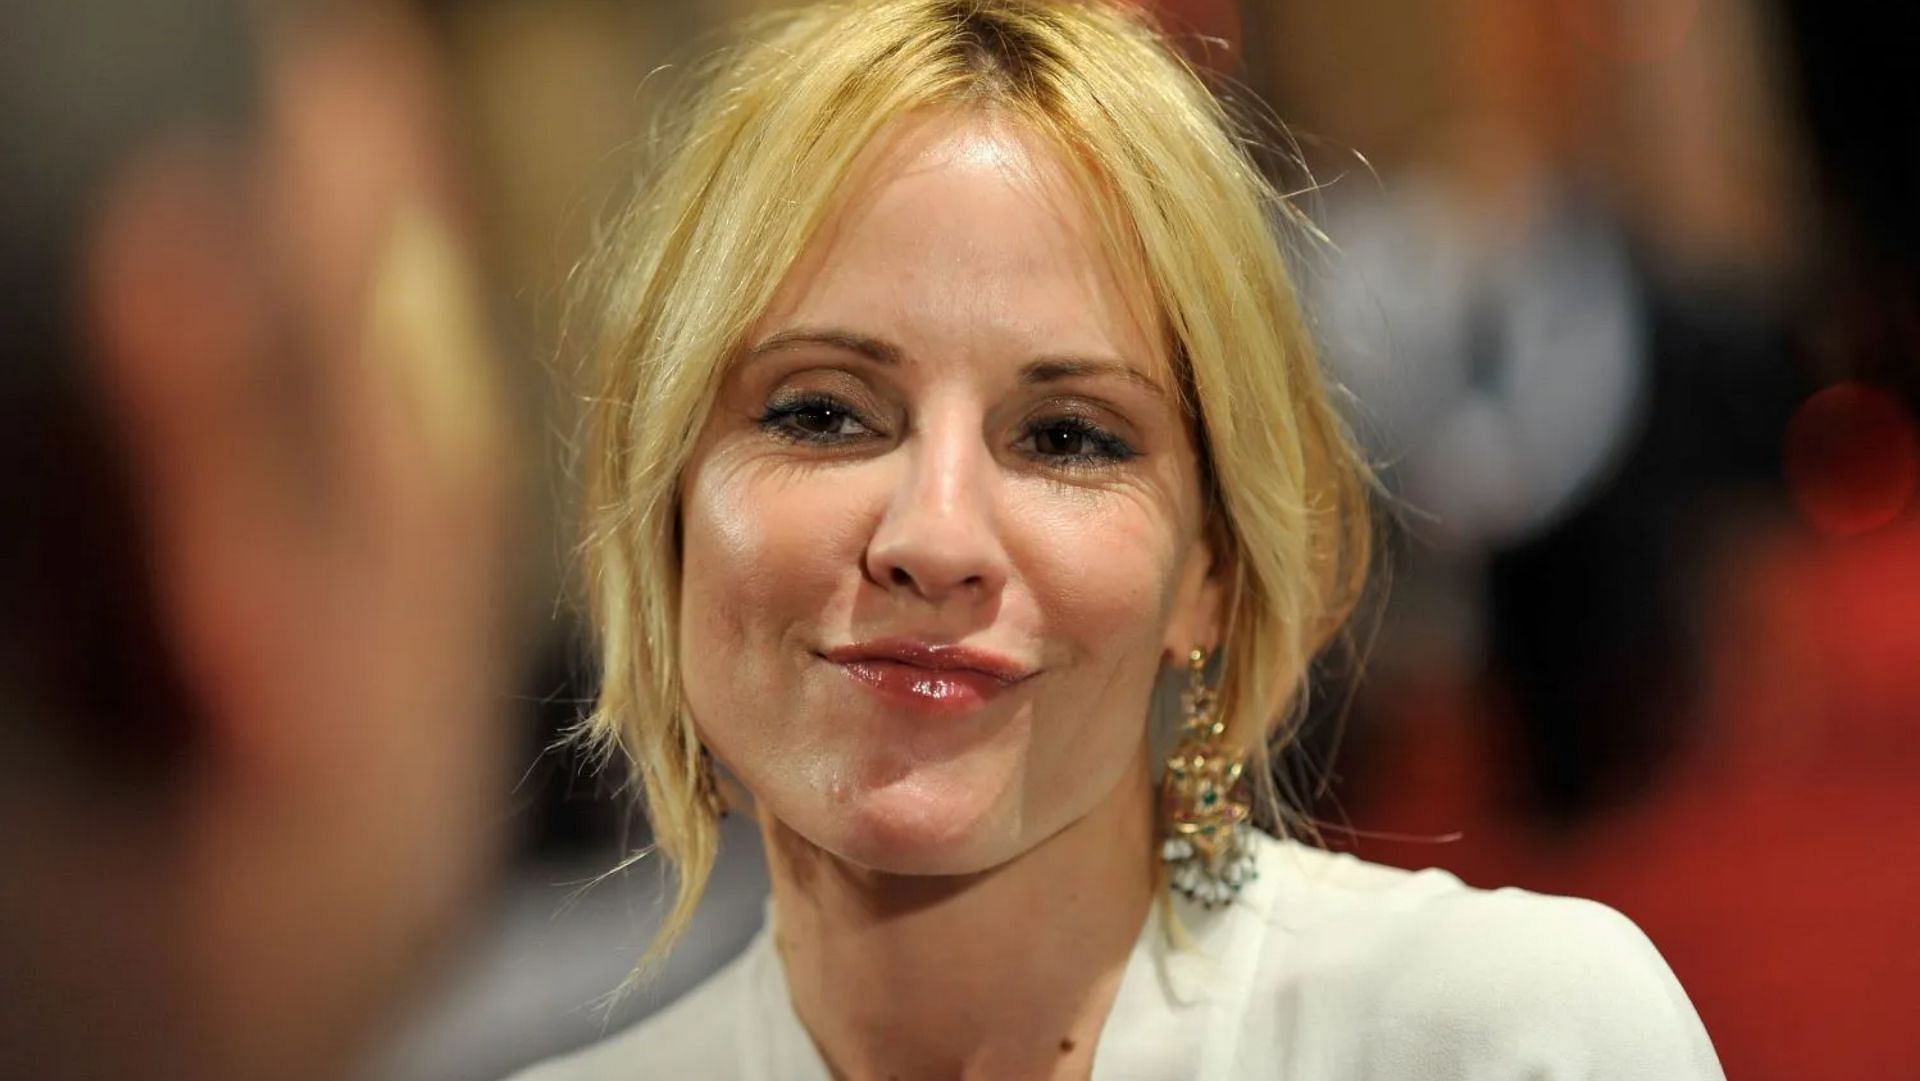 Emma Caulfield Ford stated she revealed her story for her 6-year-old daughter. (Image via Gareth Cattermole/Getty Images)